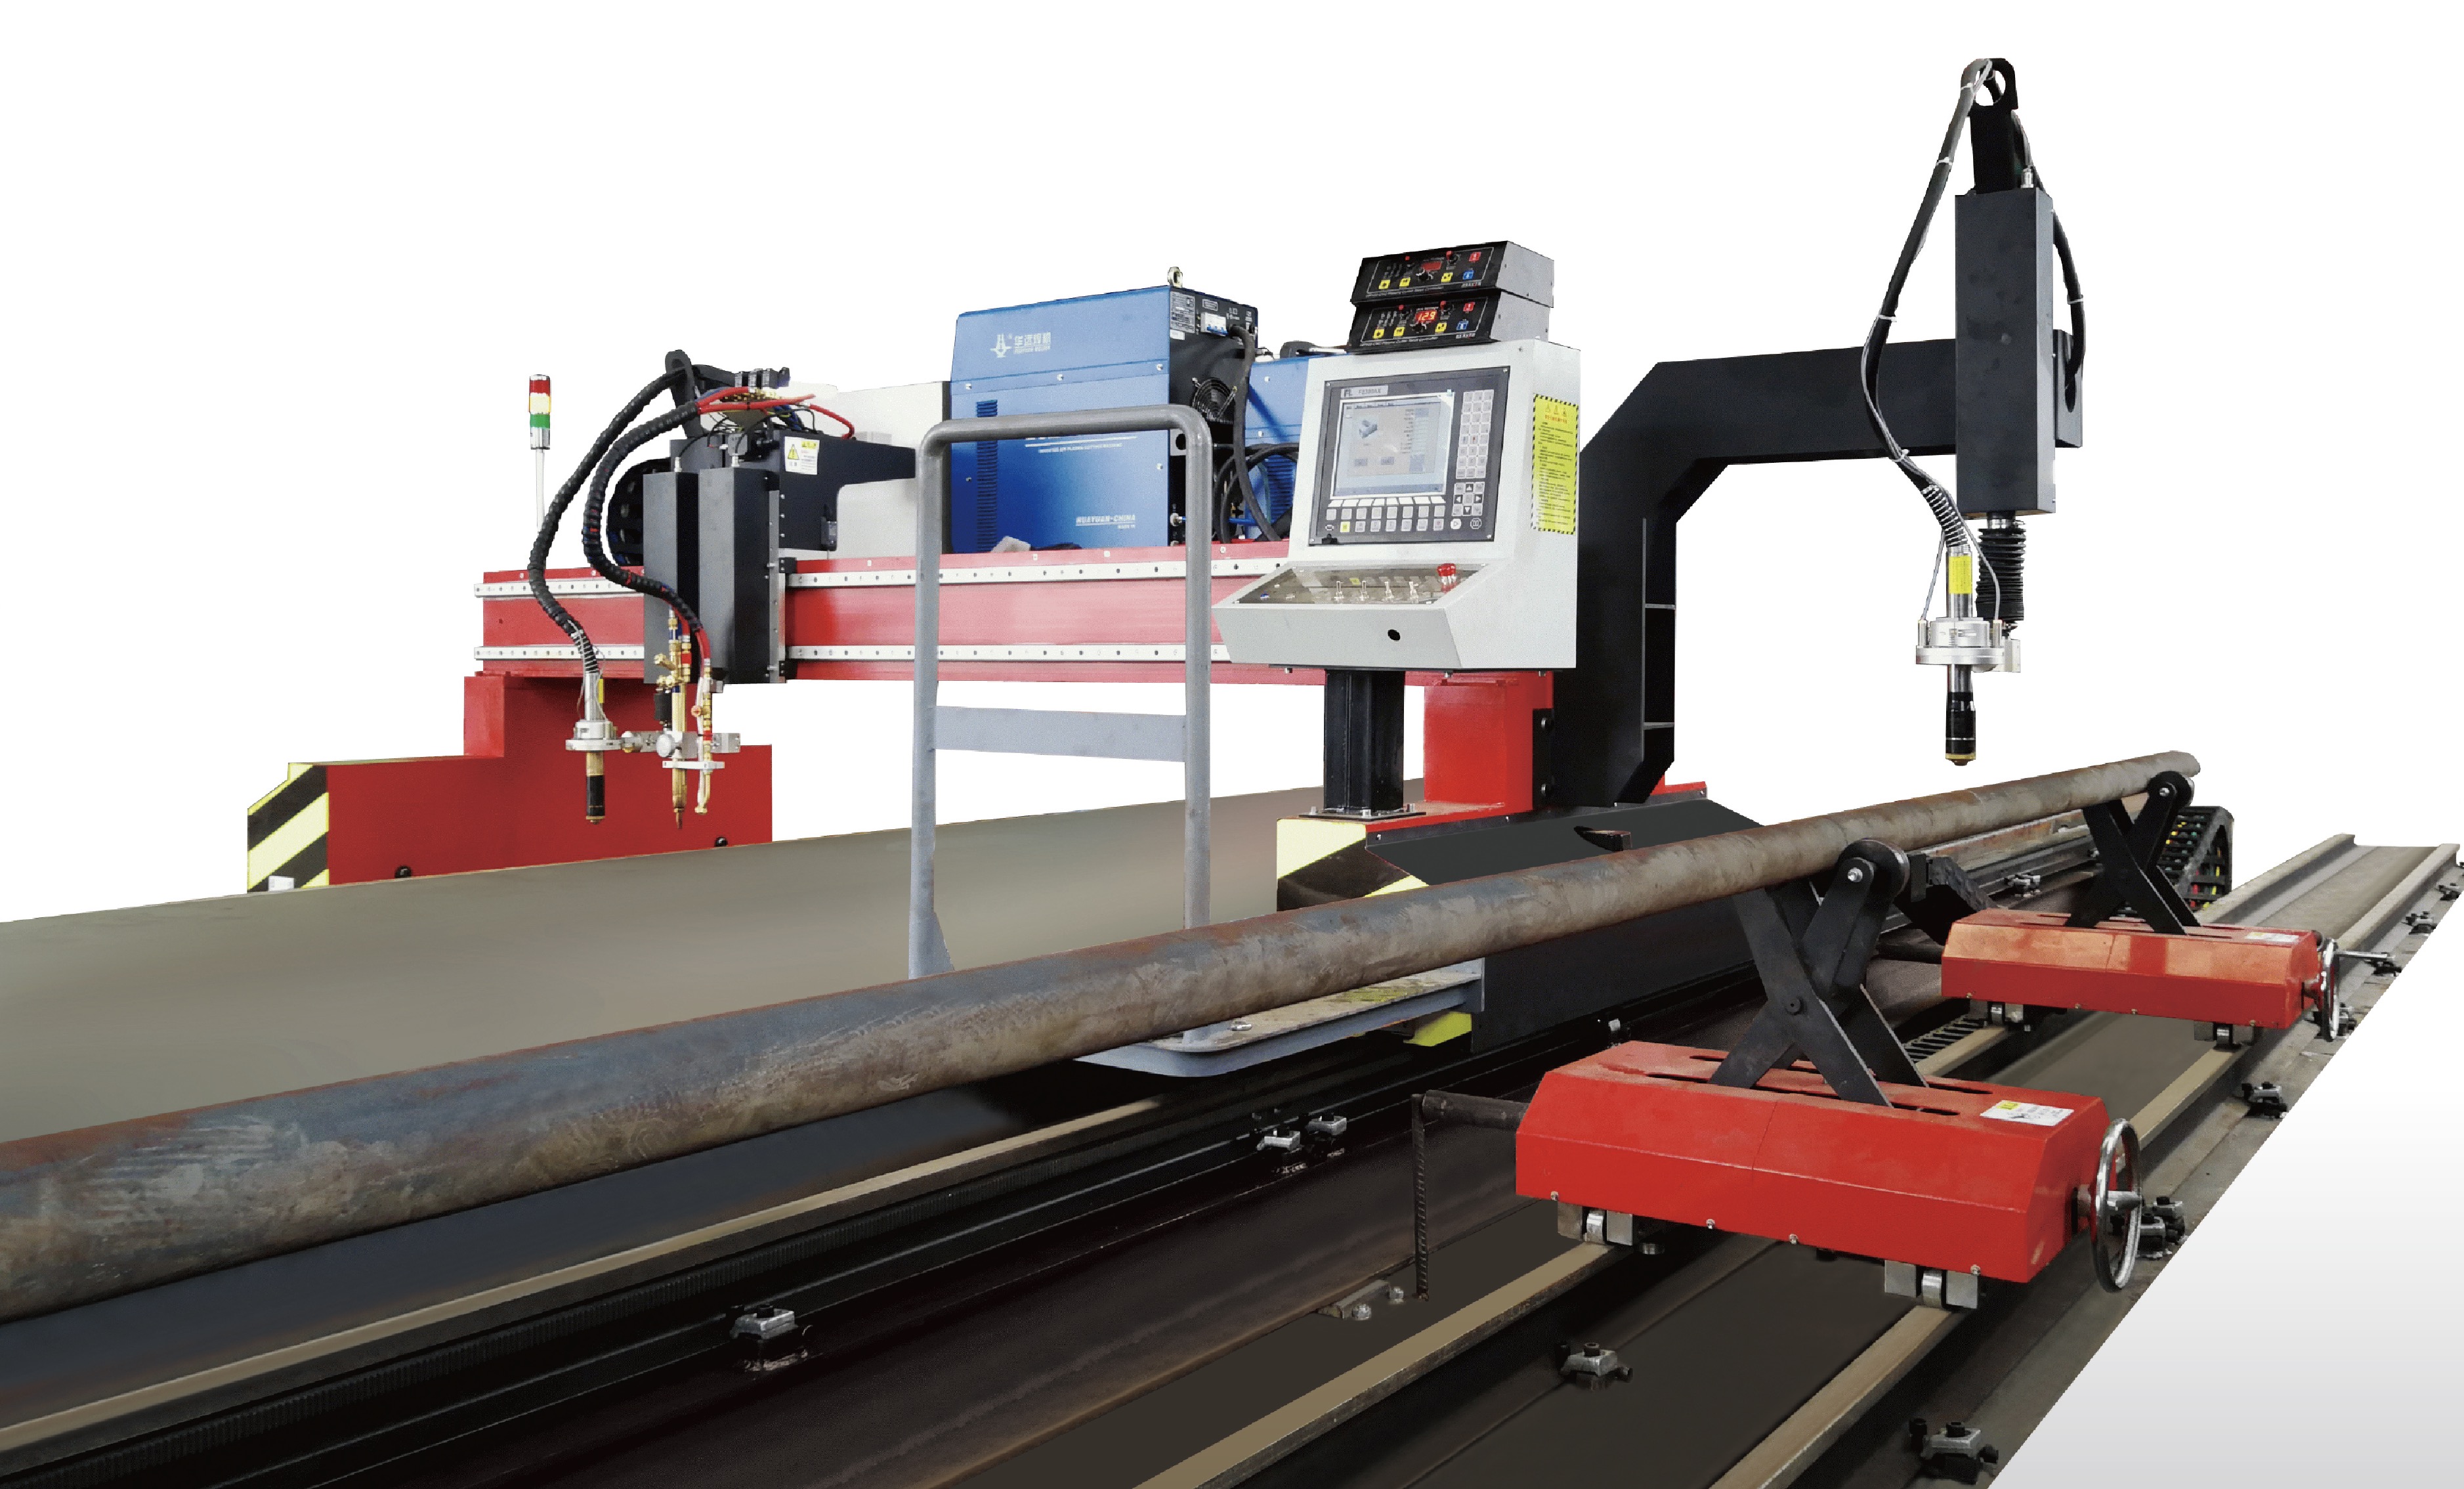 Manufacturing Companies for Cnc Plasma Systems - Gantry Pipe and Plate integrated cutting machine-MS-4GB-3212  – Meisar